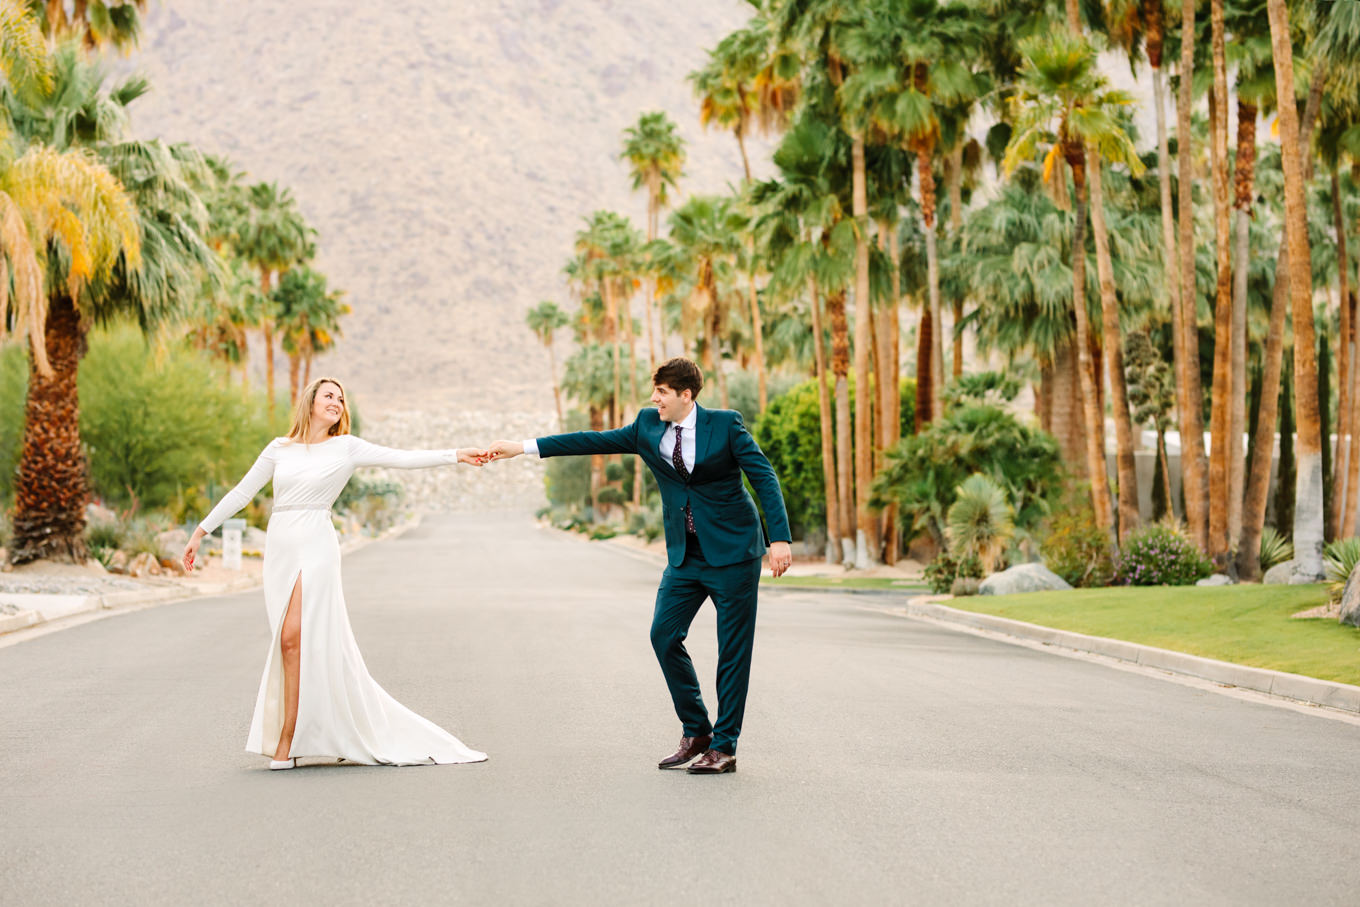 Bride and groom dancing in palm tree lined street | Colorful jewel tone Palm Springs elopement | Fresh and colorful photography for fun-loving couples in Southern California | #colorfulelopement #palmspringselopement #elopementphotography #palmspringswedding Source: Mary Costa Photography | Los Angeles